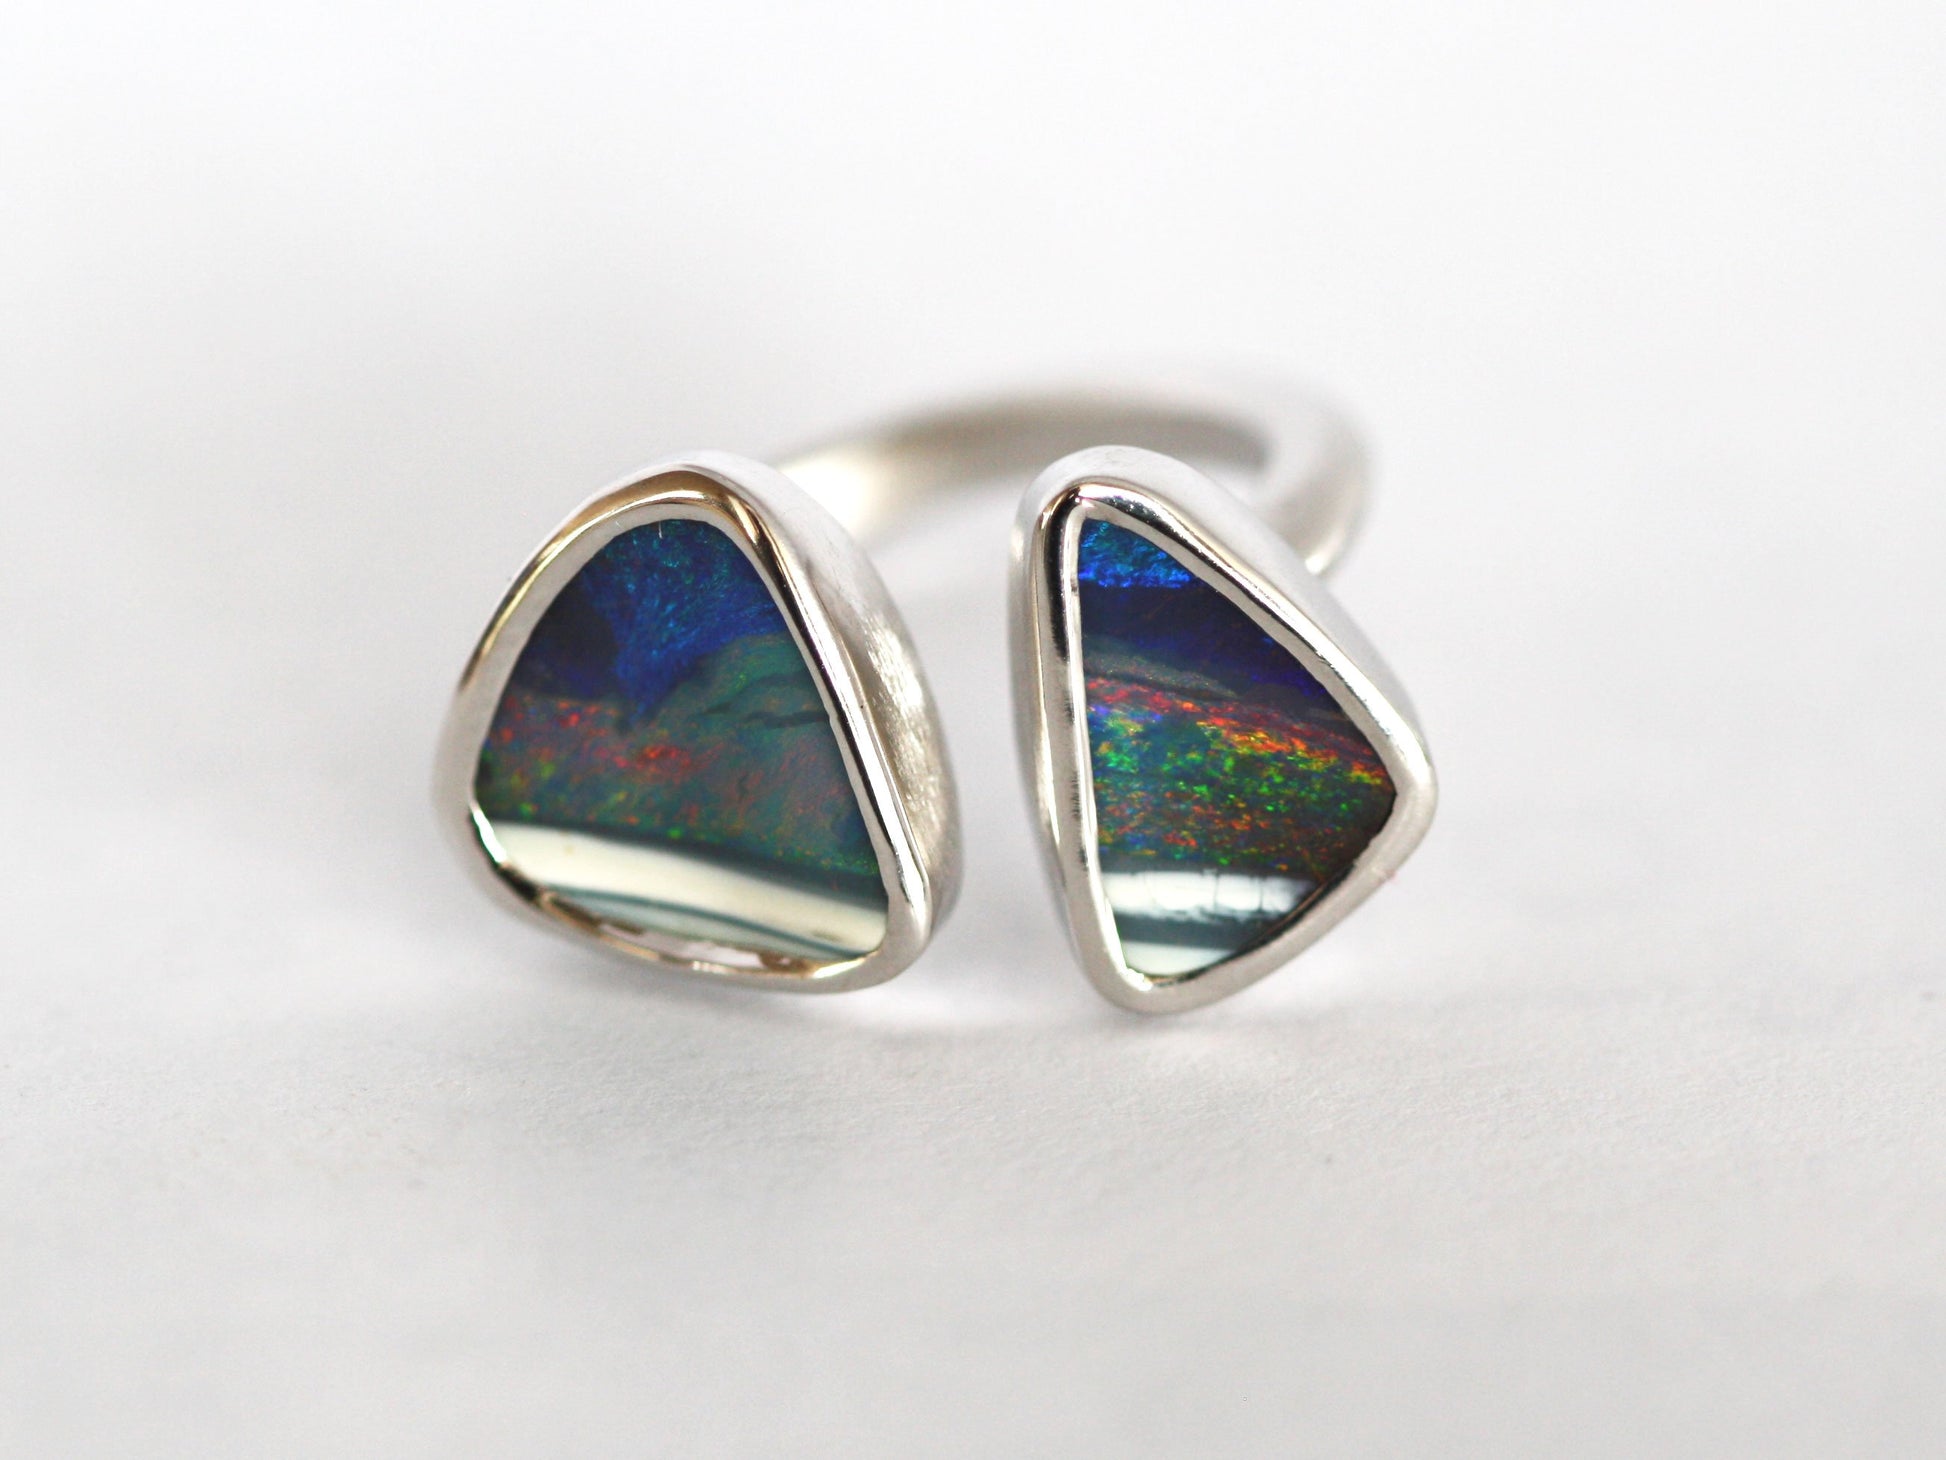 Silver Queensland boulder opal ring. Double Opal set in smooth polished silver. High quality, Australian made by Custom Jewellery Co in our Brisbane studio. Hand crafted using local and ethical materials. Opal is blue with strip of white, has reds, greens and purples shining in the stones. Each stone is a triangle shape